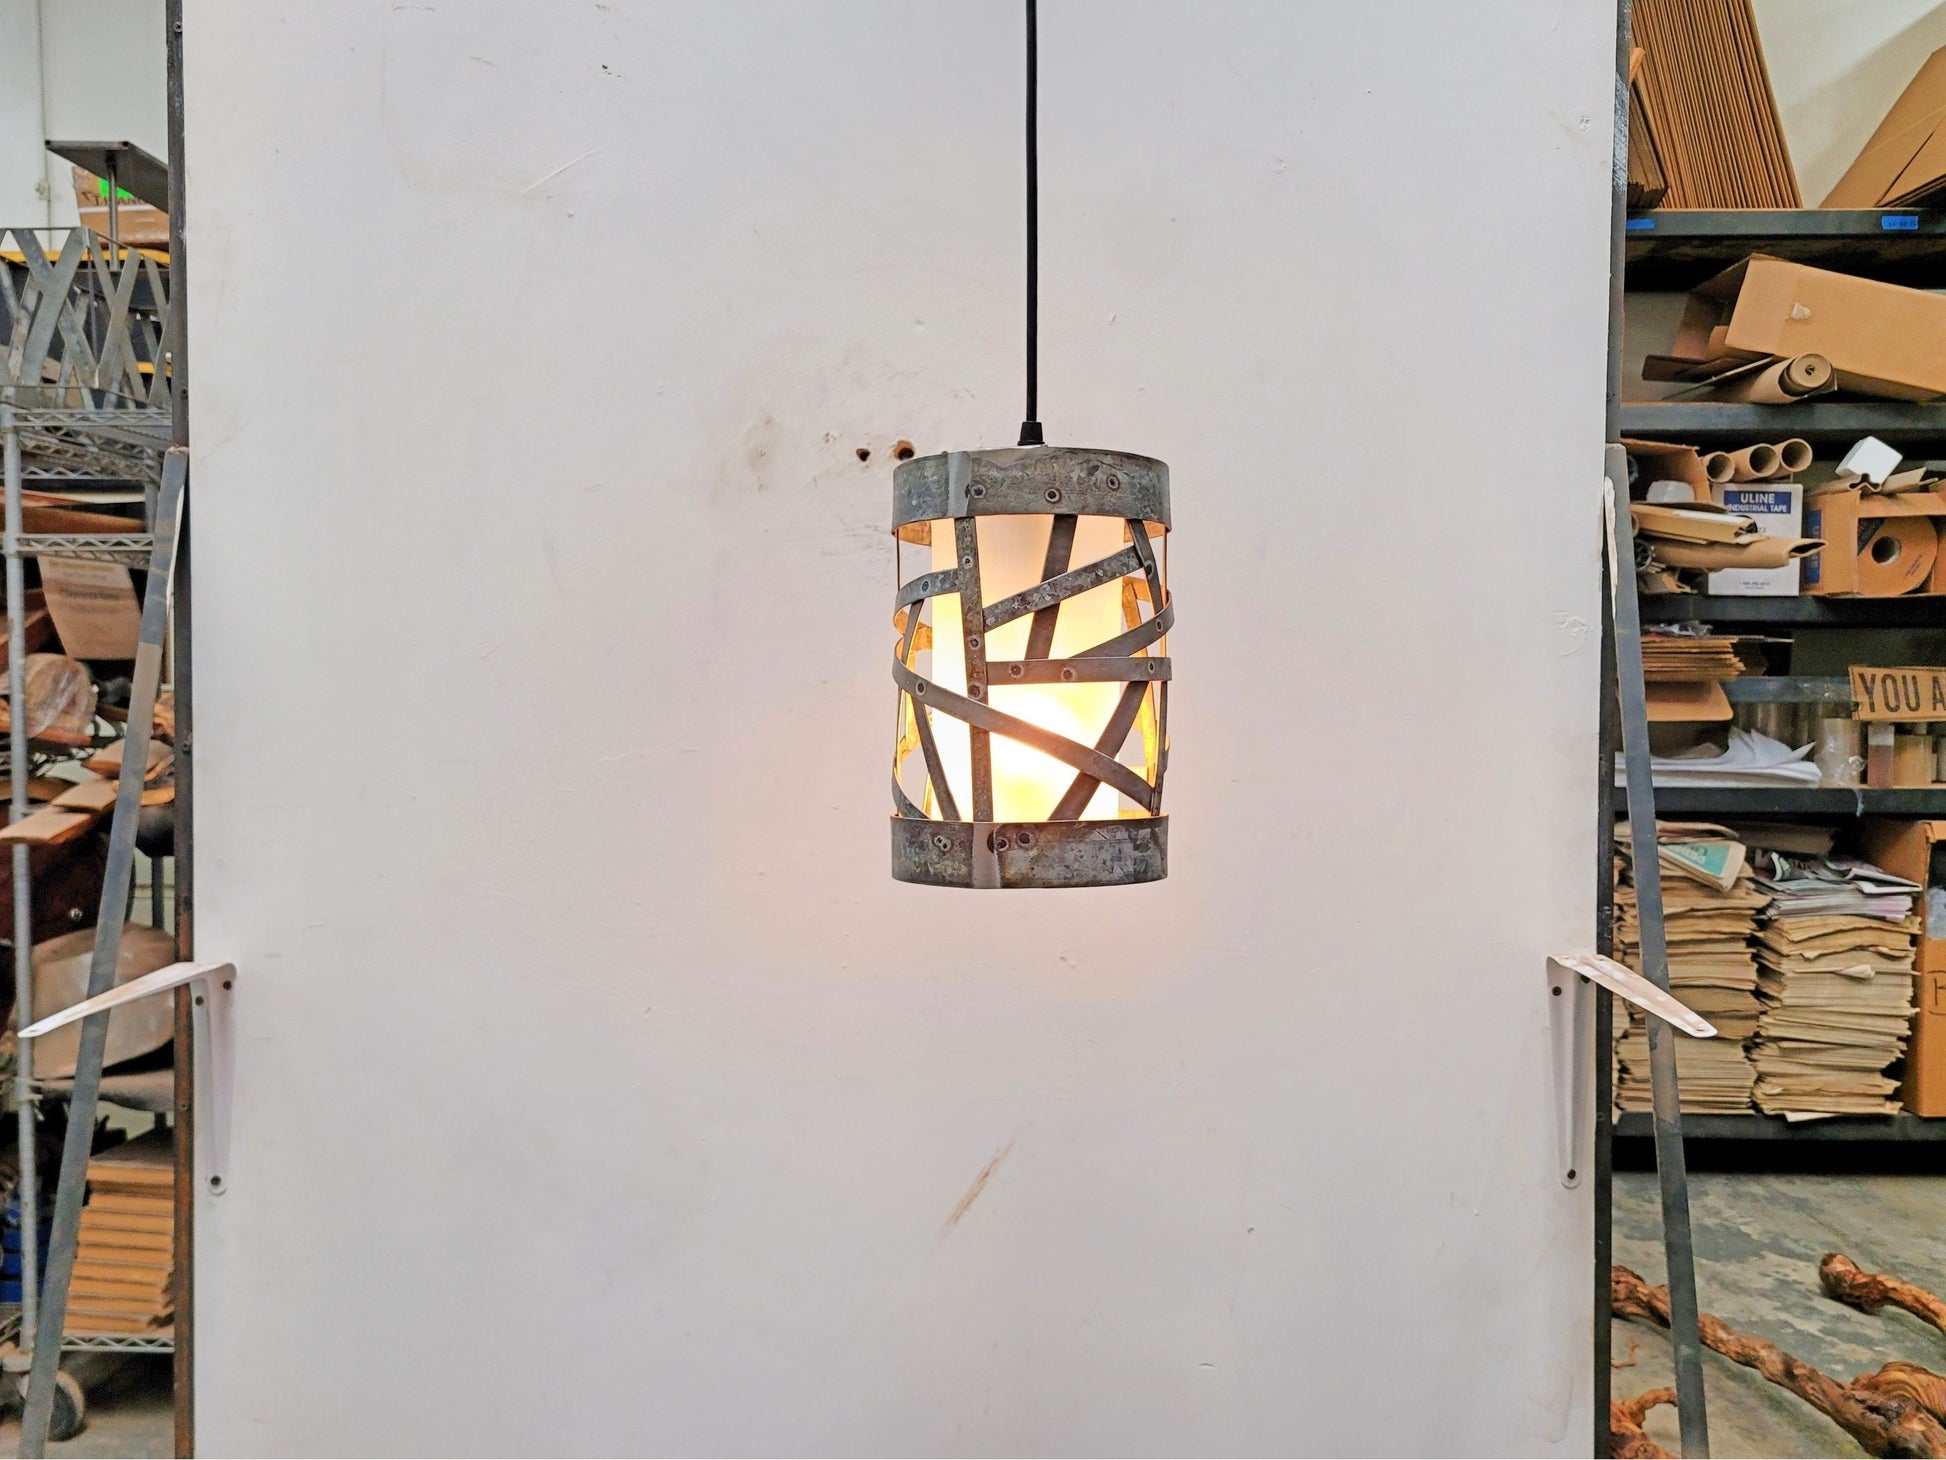 Wine Barrel Pendant Light - RURA - Made from retired Napa wine barrel rings and bottles - 100% Recycled!